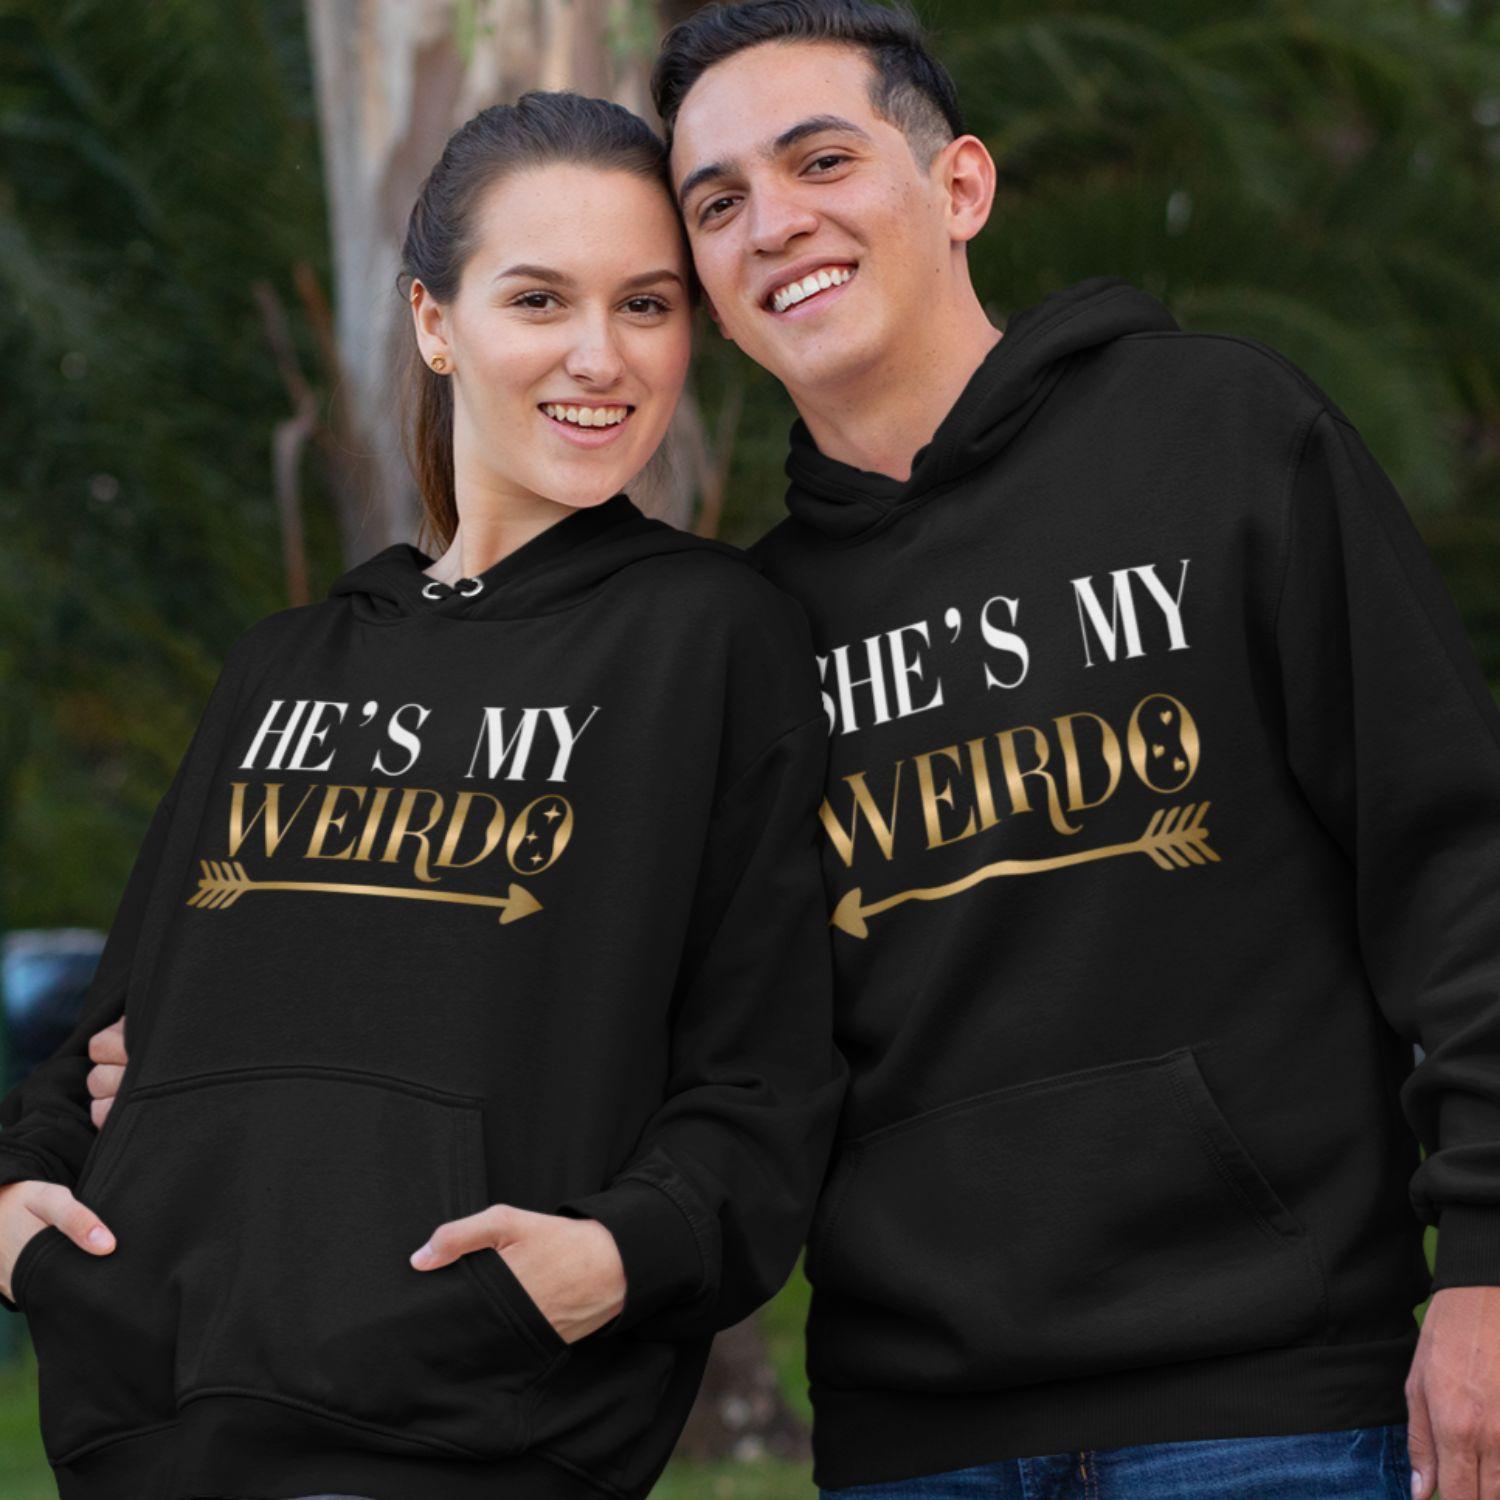 He's My Weirdo She's My Weirdo, Funny Couples Matching Outfit - 4Lovebirds